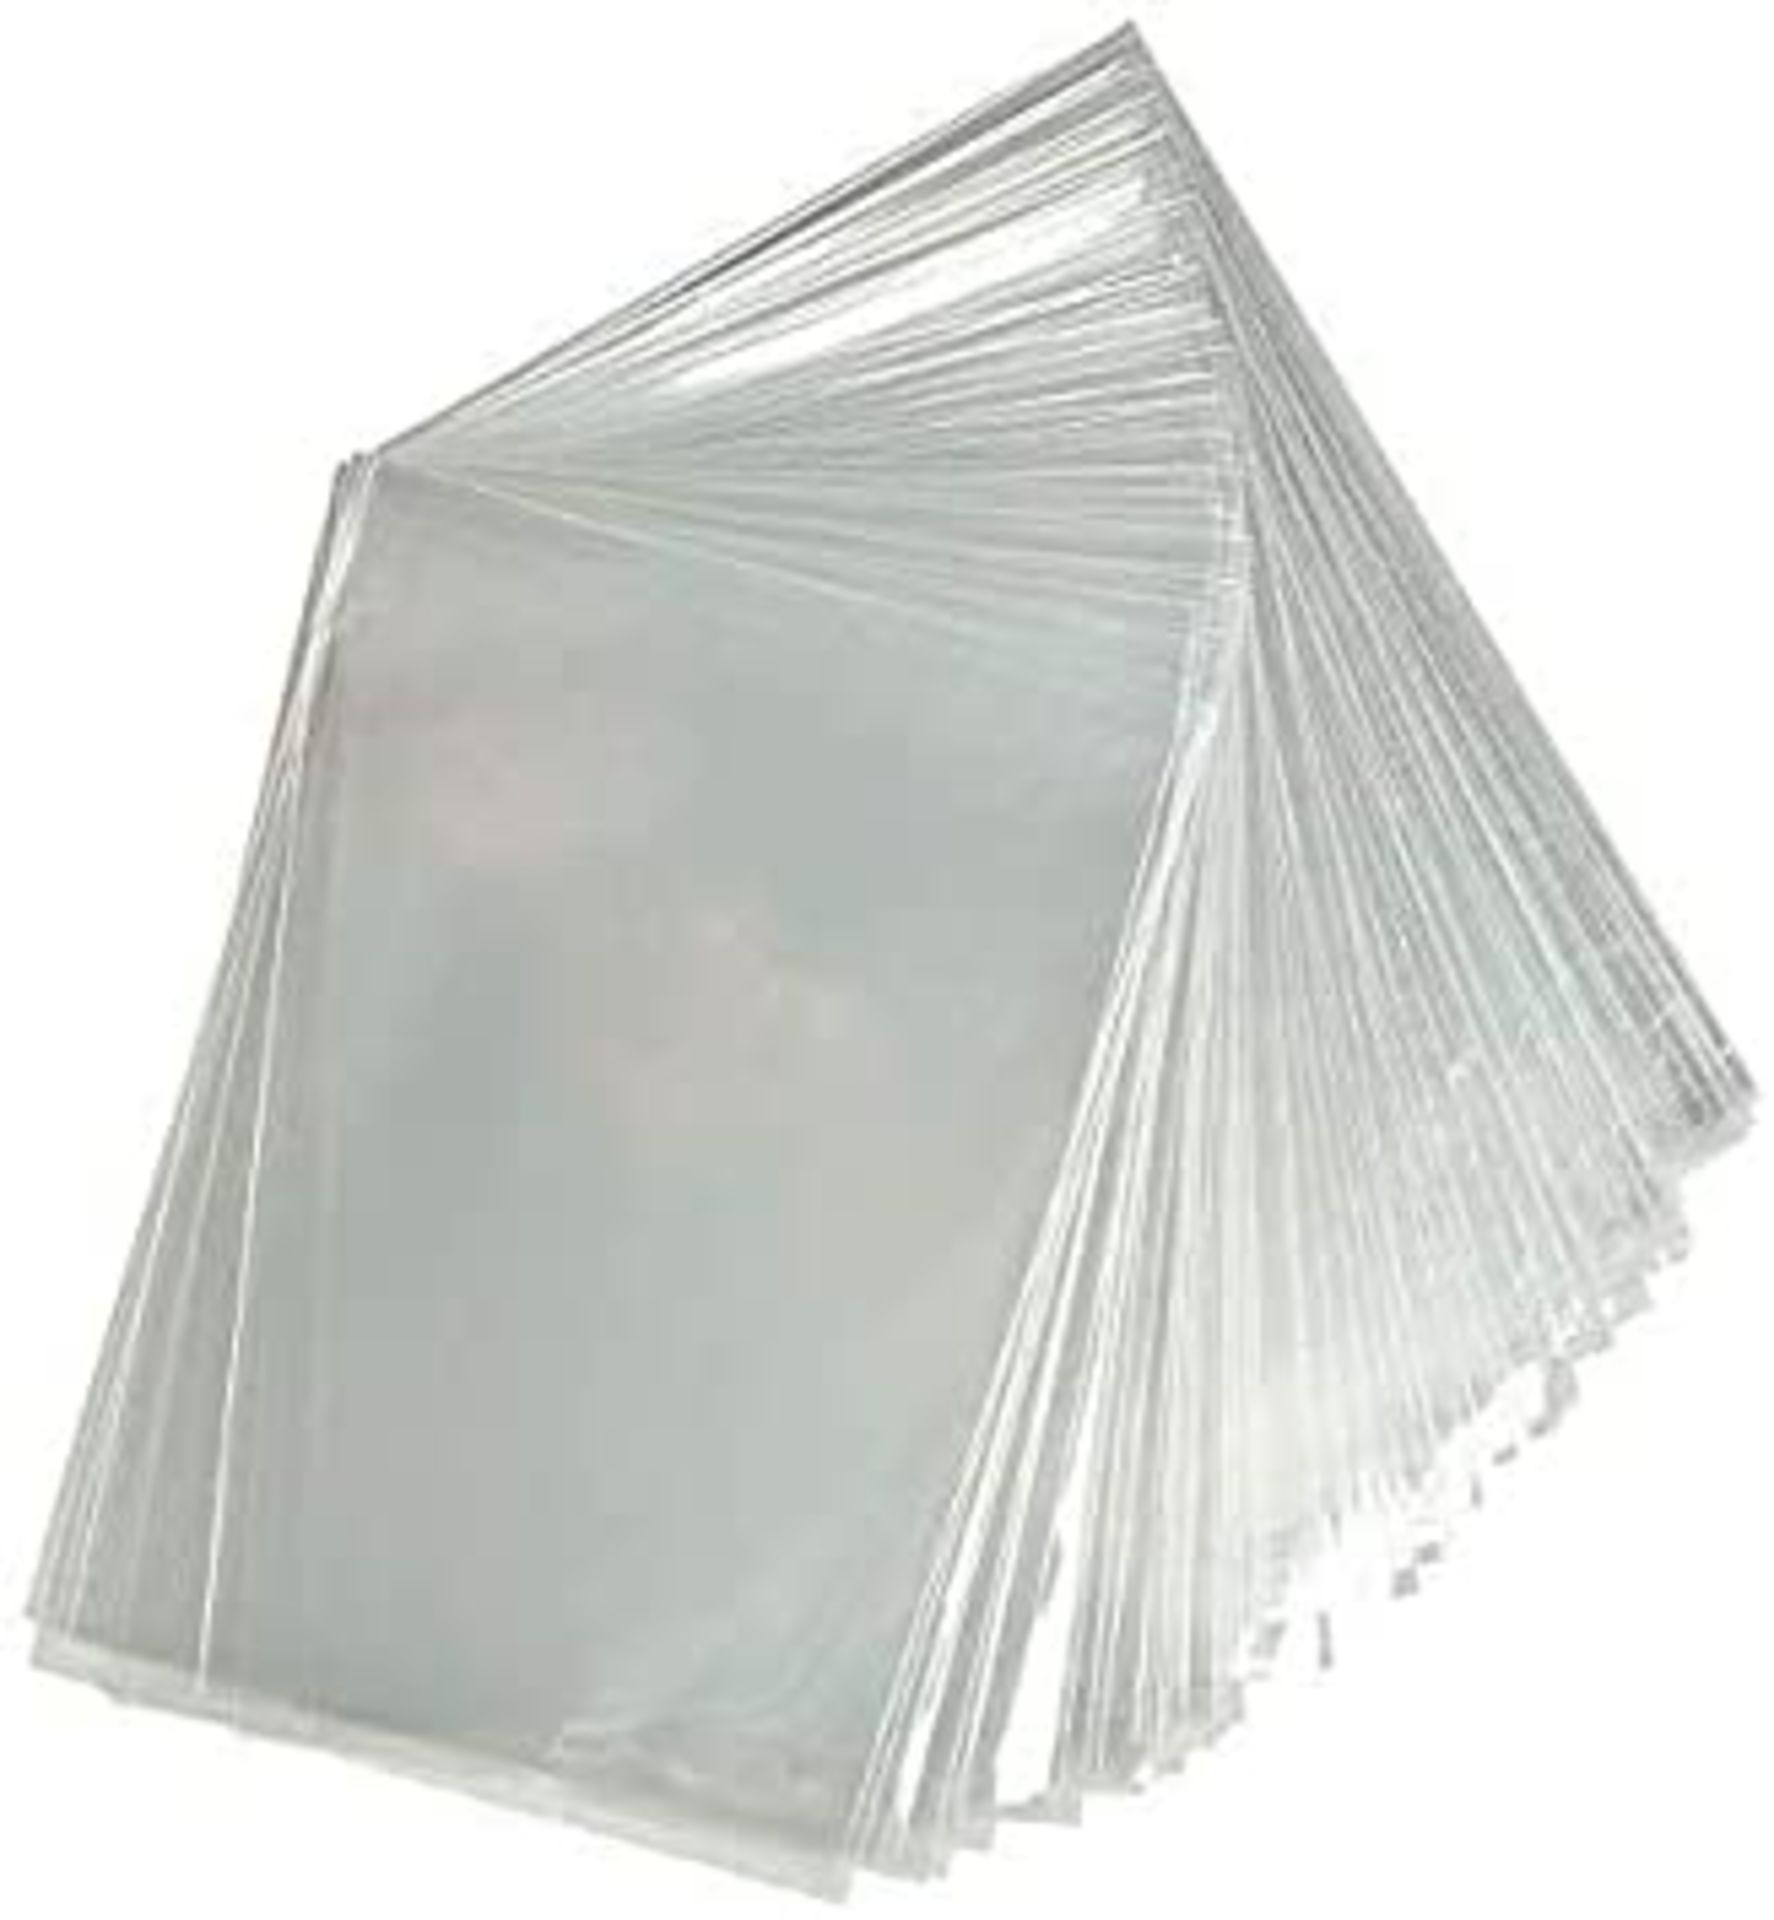 RRP - £10.01 A3 Cello Bags - Crystal Clear & Good Thickness - for A3